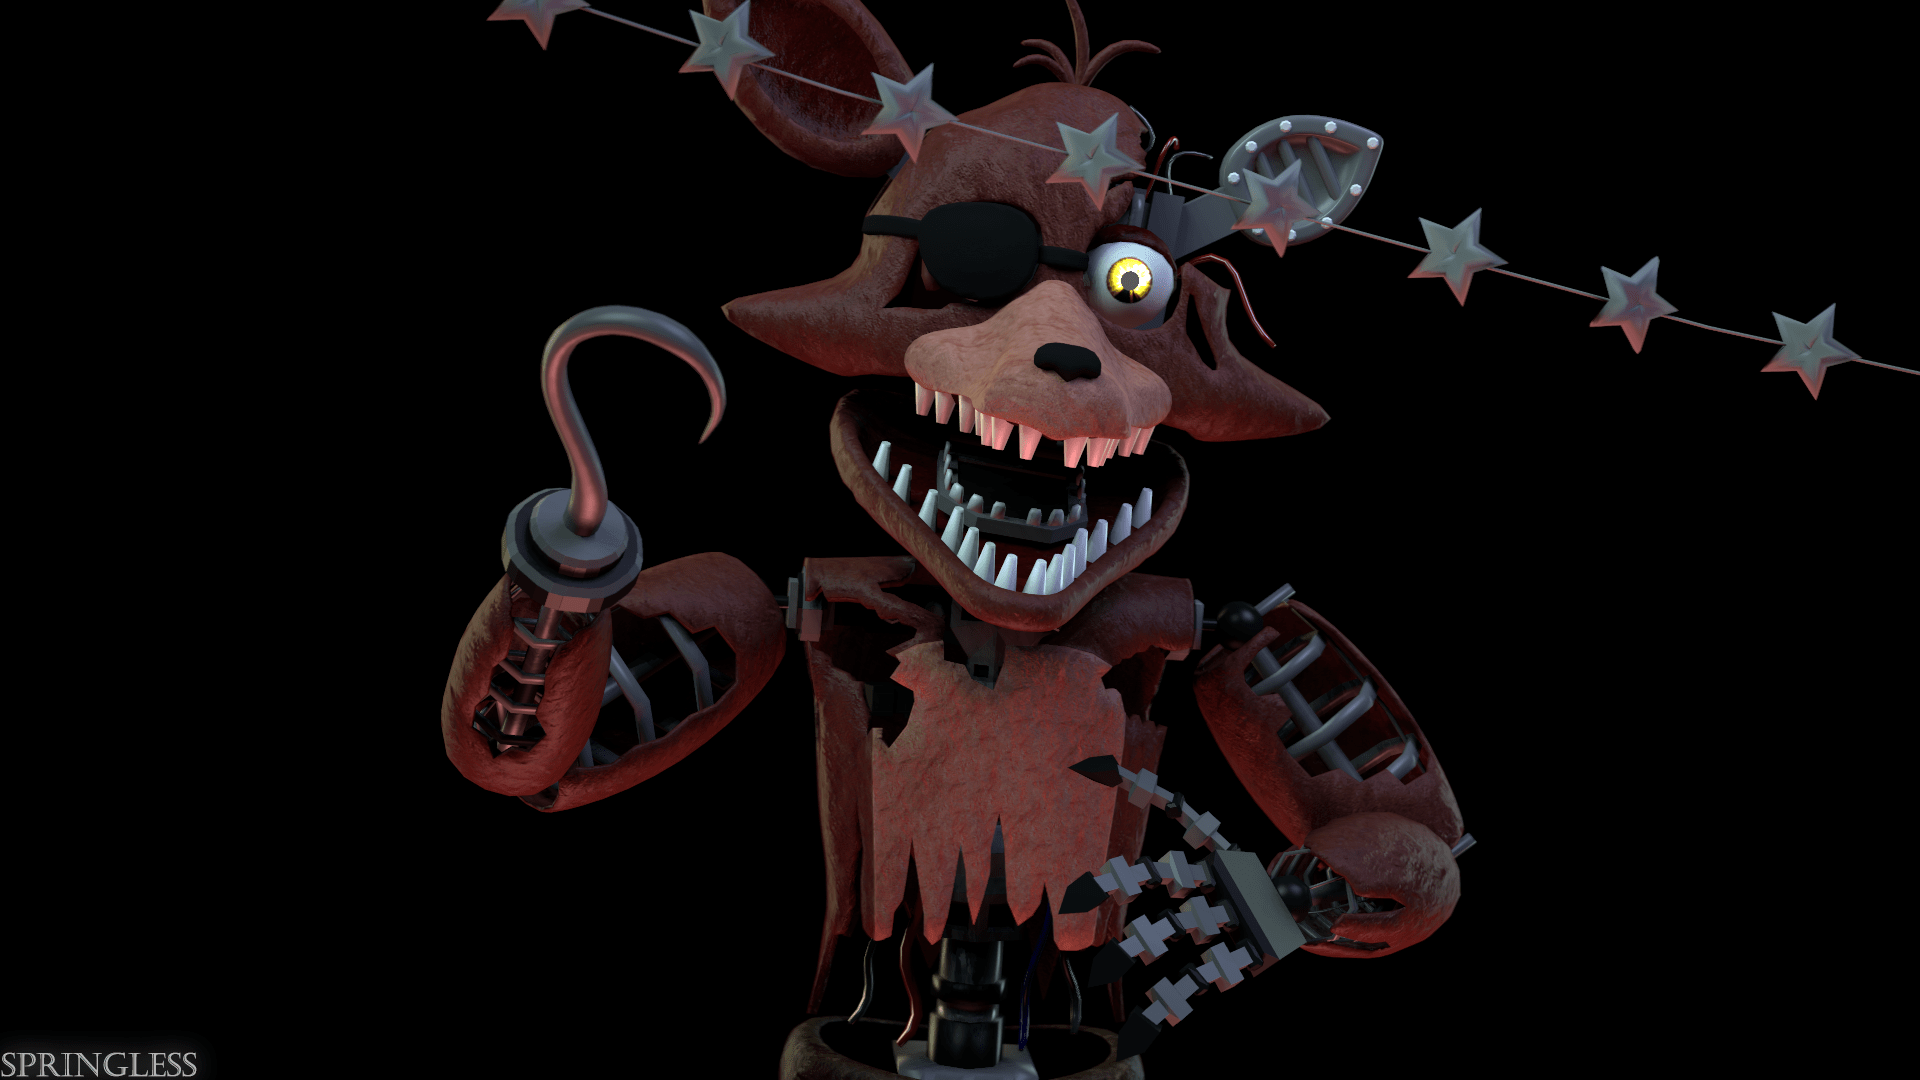 Fnaf Foxy Wallpapers Top Free Fnaf Foxy Backgrounds